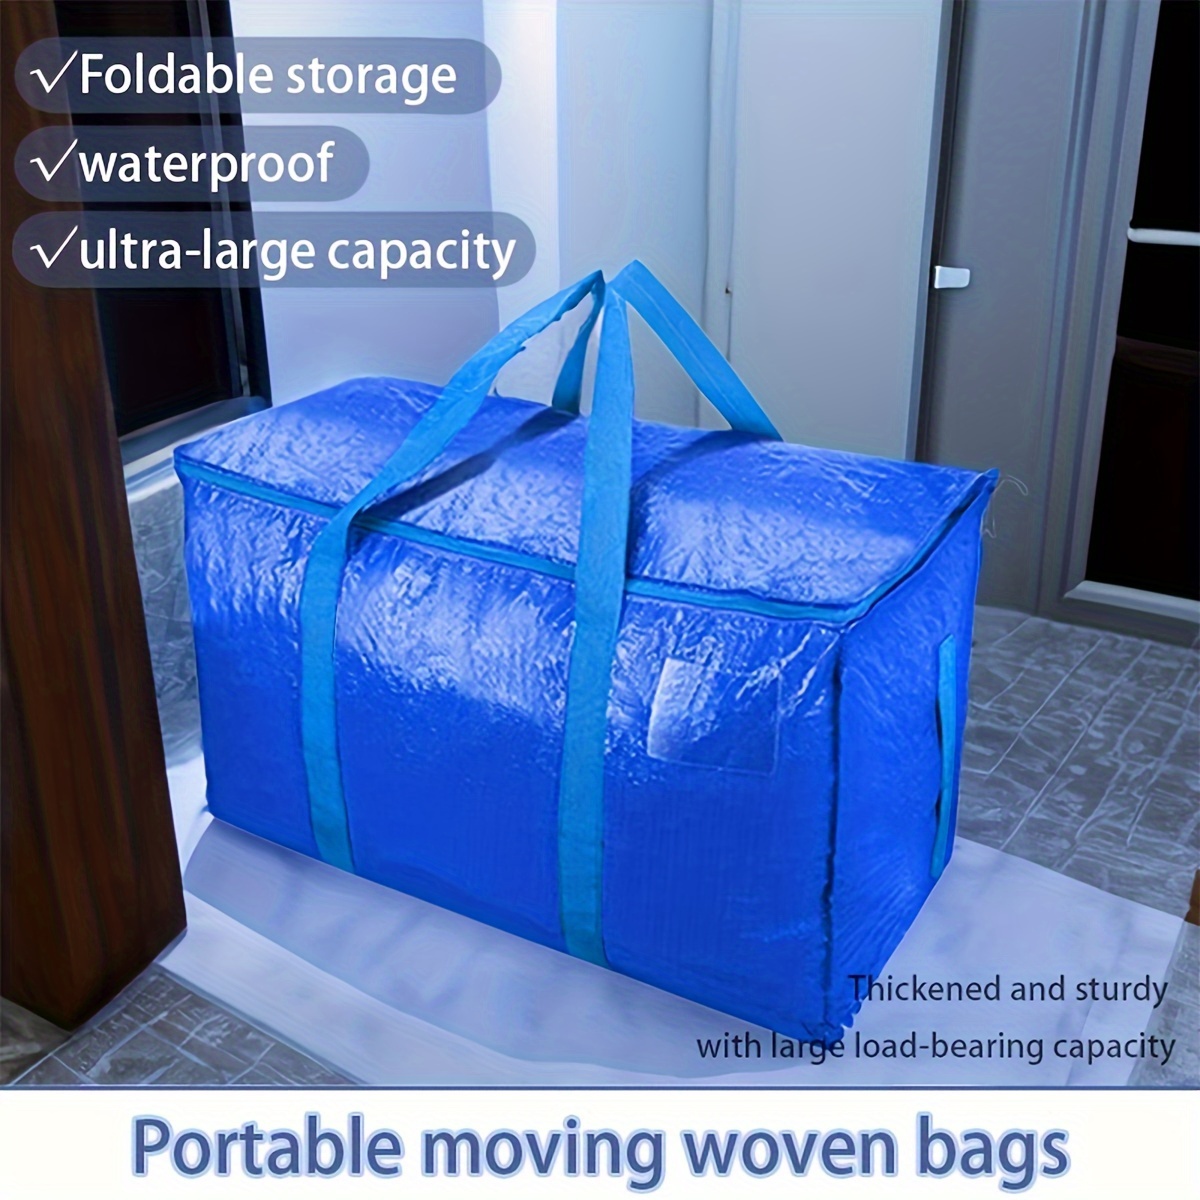 Large Moving Bags With Zippers & Carrying Handles, Heavy-duty